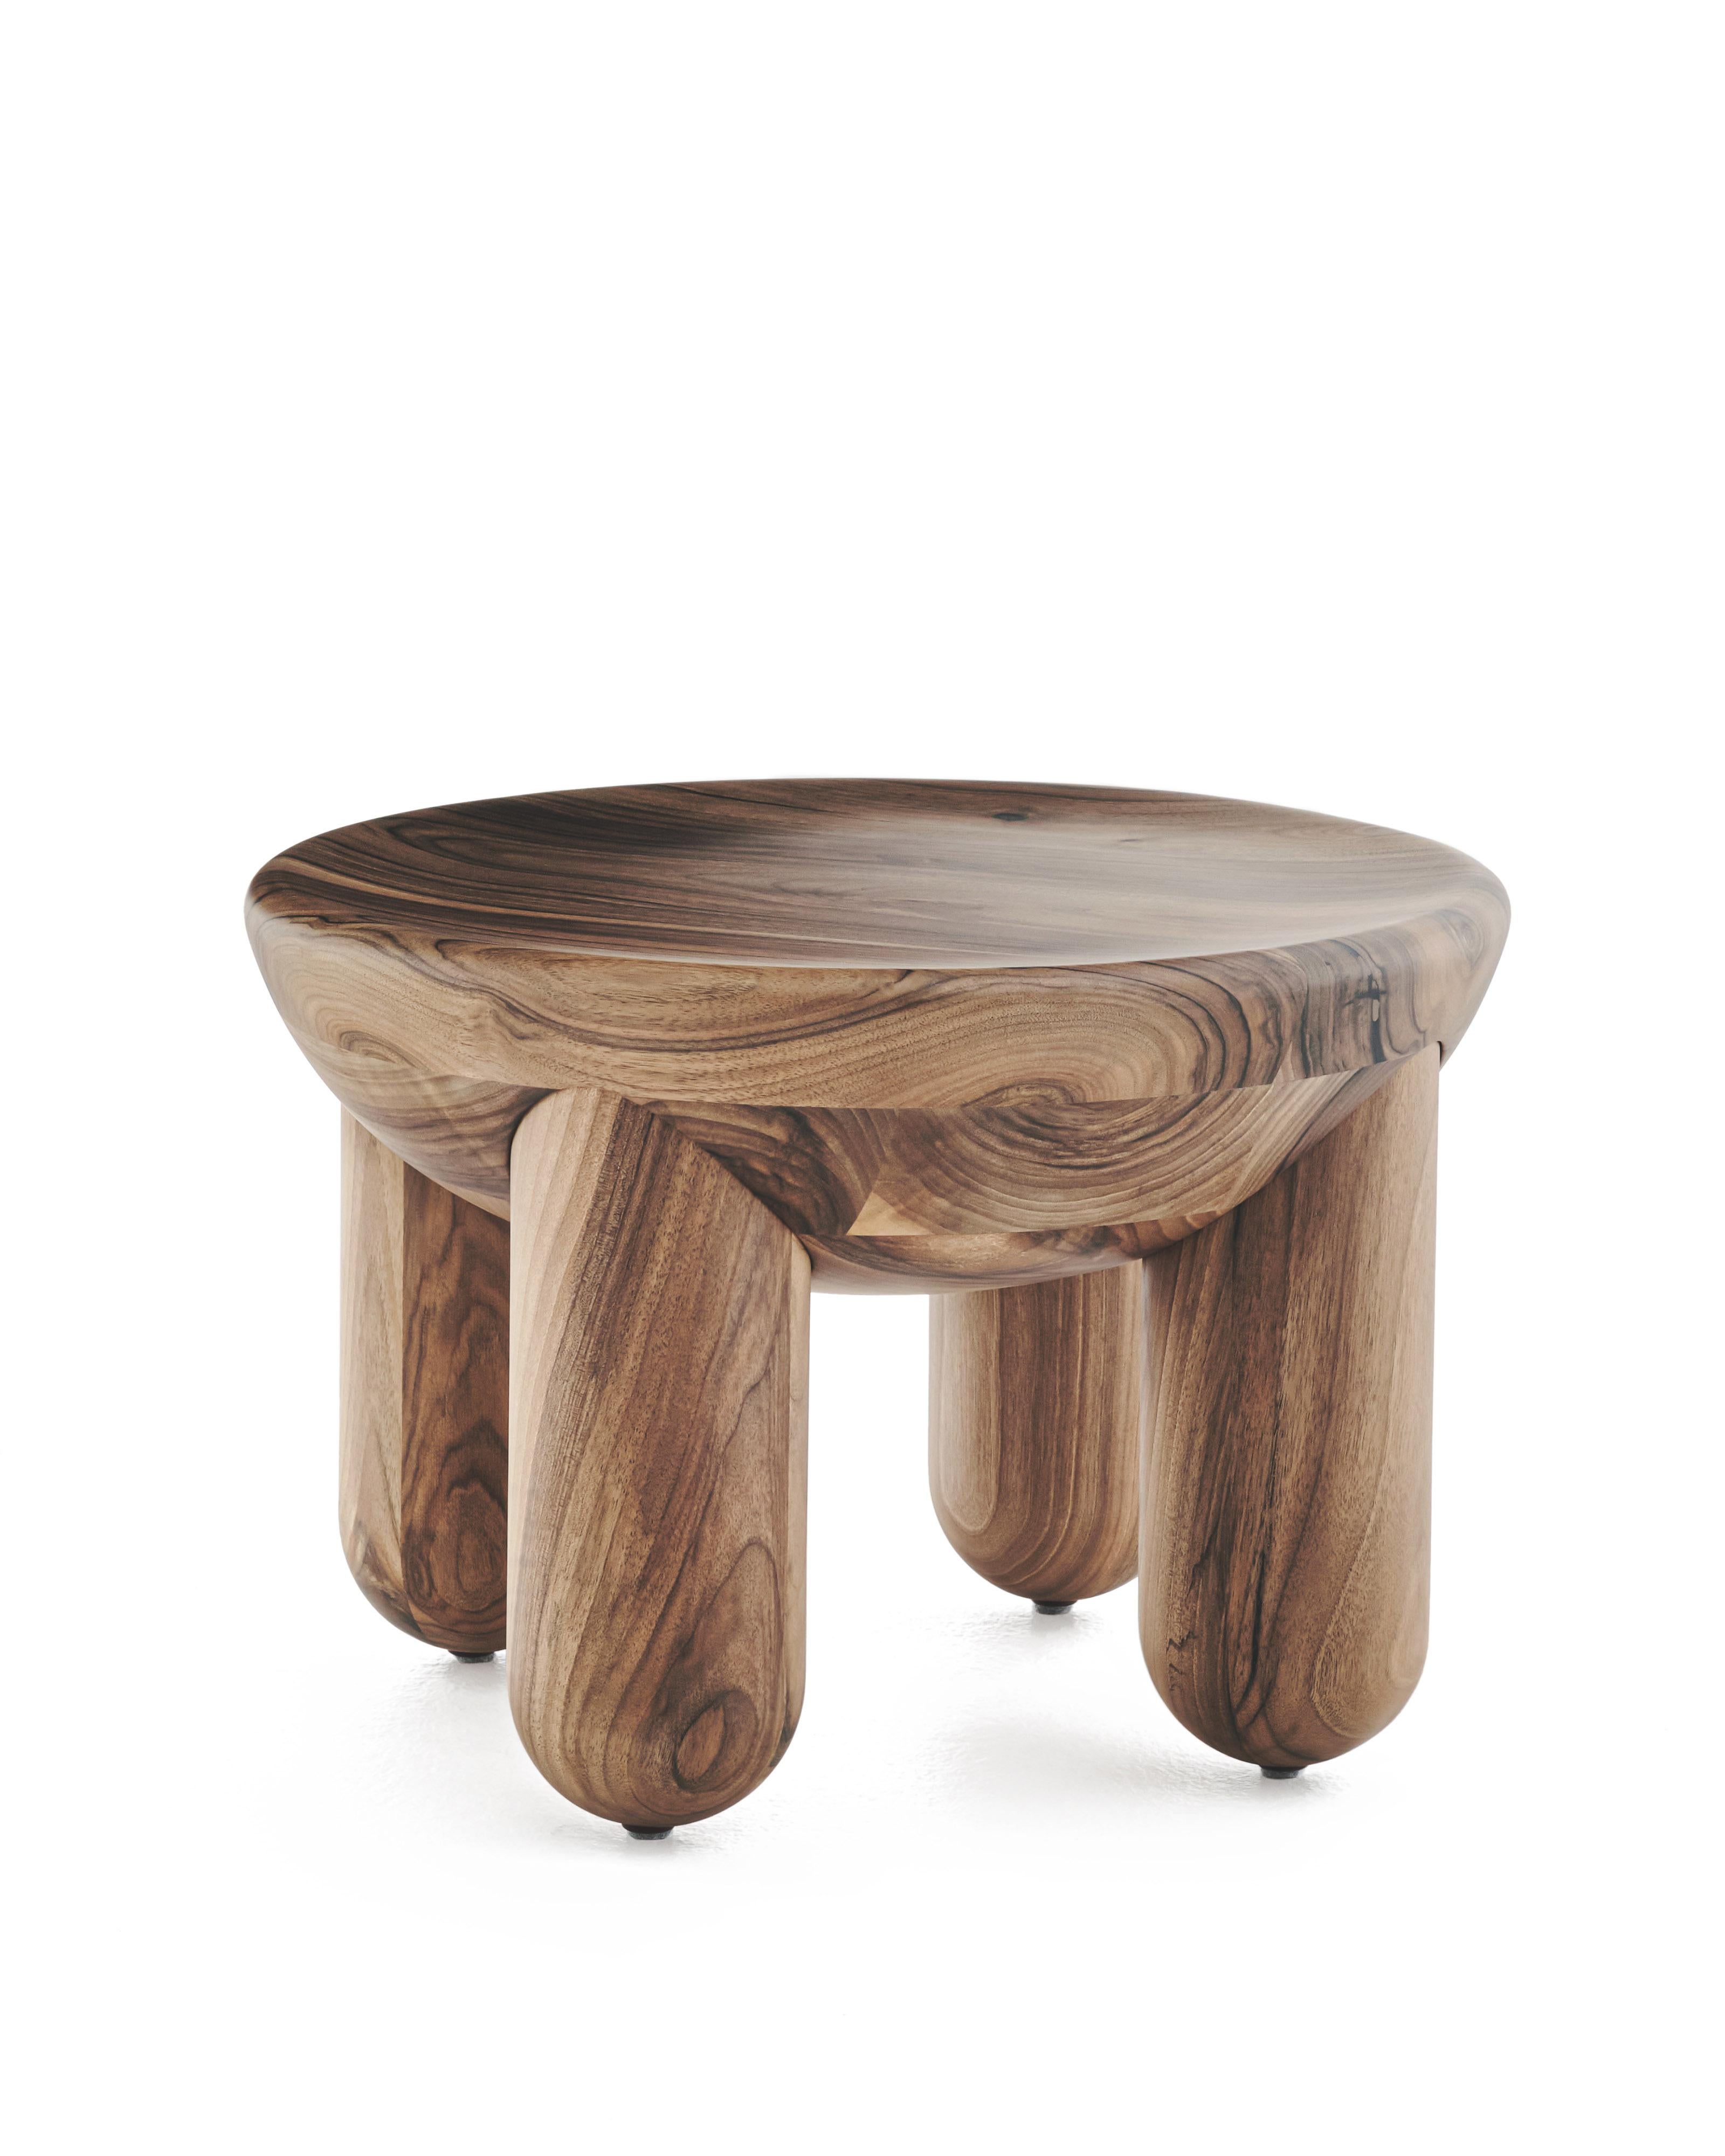 Gently rounded coffee tables “Freyja” created as an homage to femininity and natural beauty.
These sculptural and sensual tables, named after Freyja, a Scandinavian goddess of love, beauty, and fertility, are designed to evoke a sense of warmth,